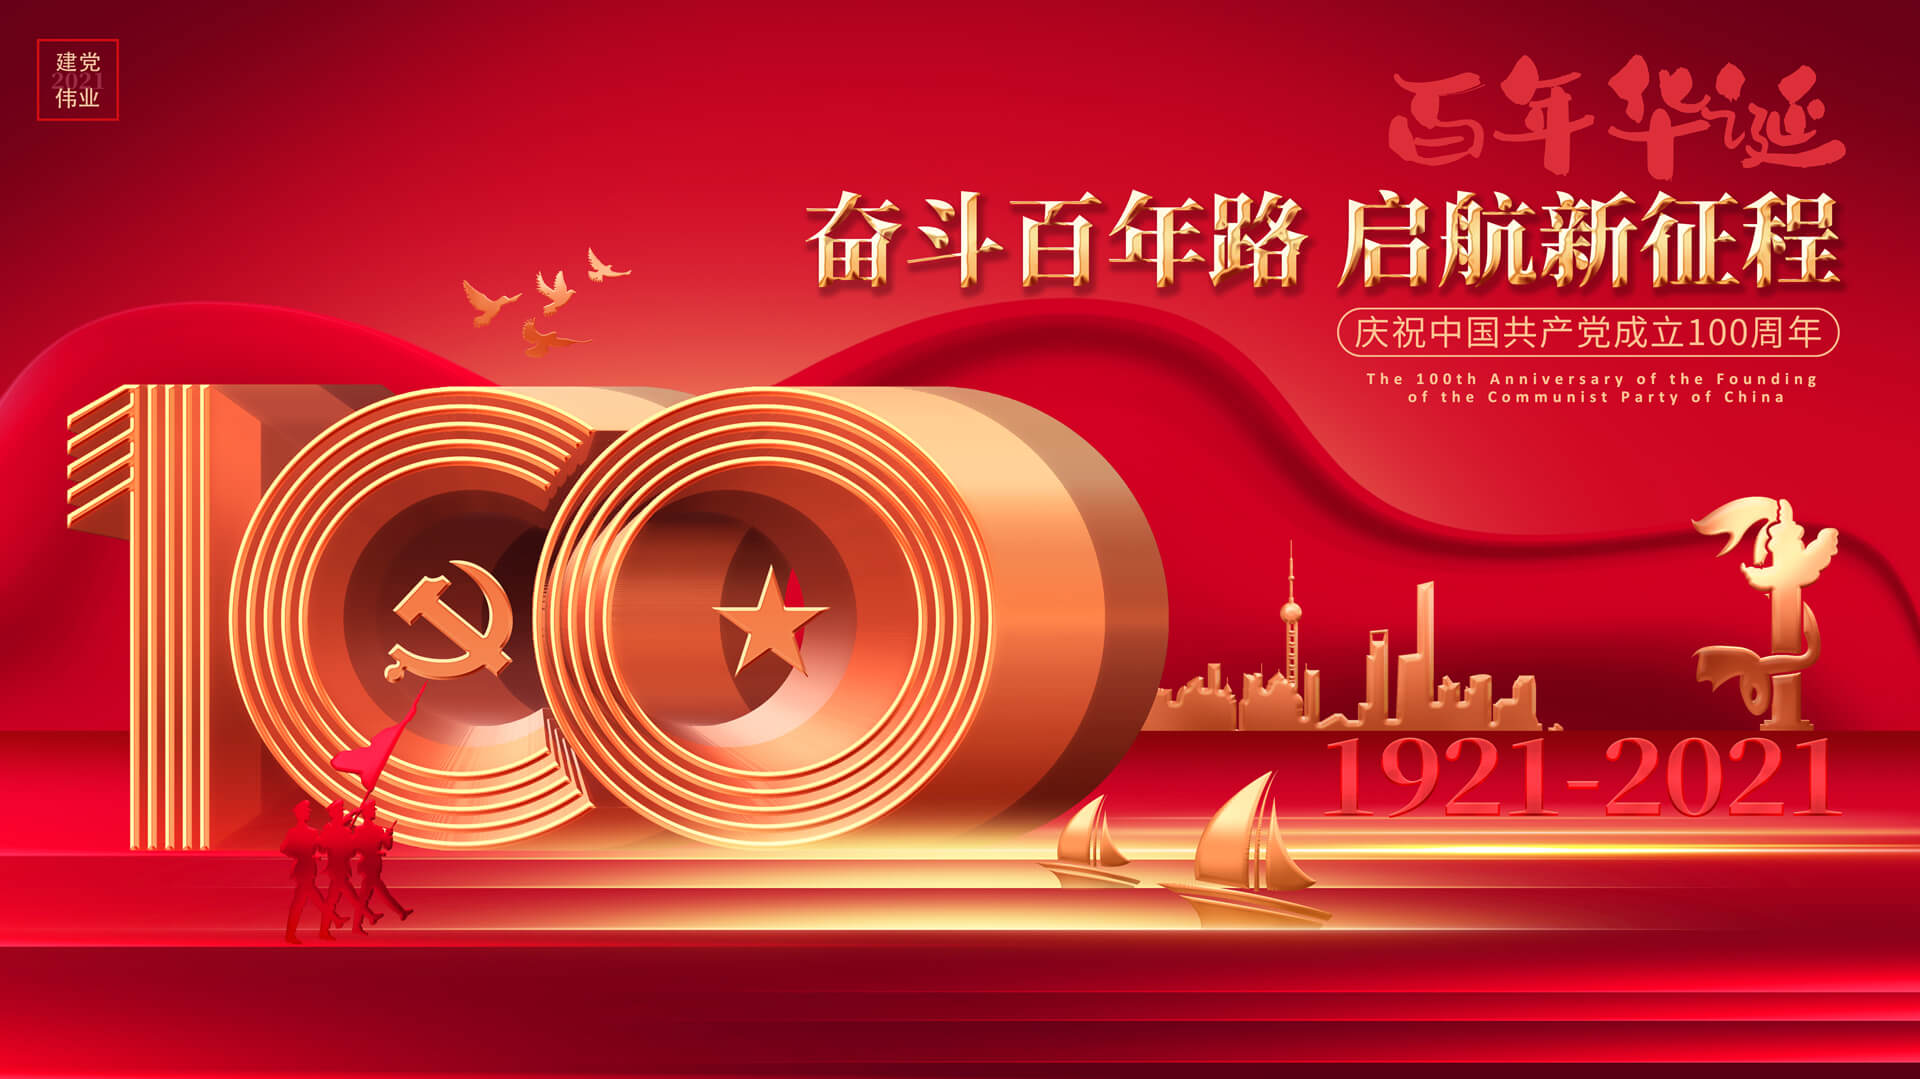 Huge congratulations to the 100th anniversary of the founding of the Communist Party of China!